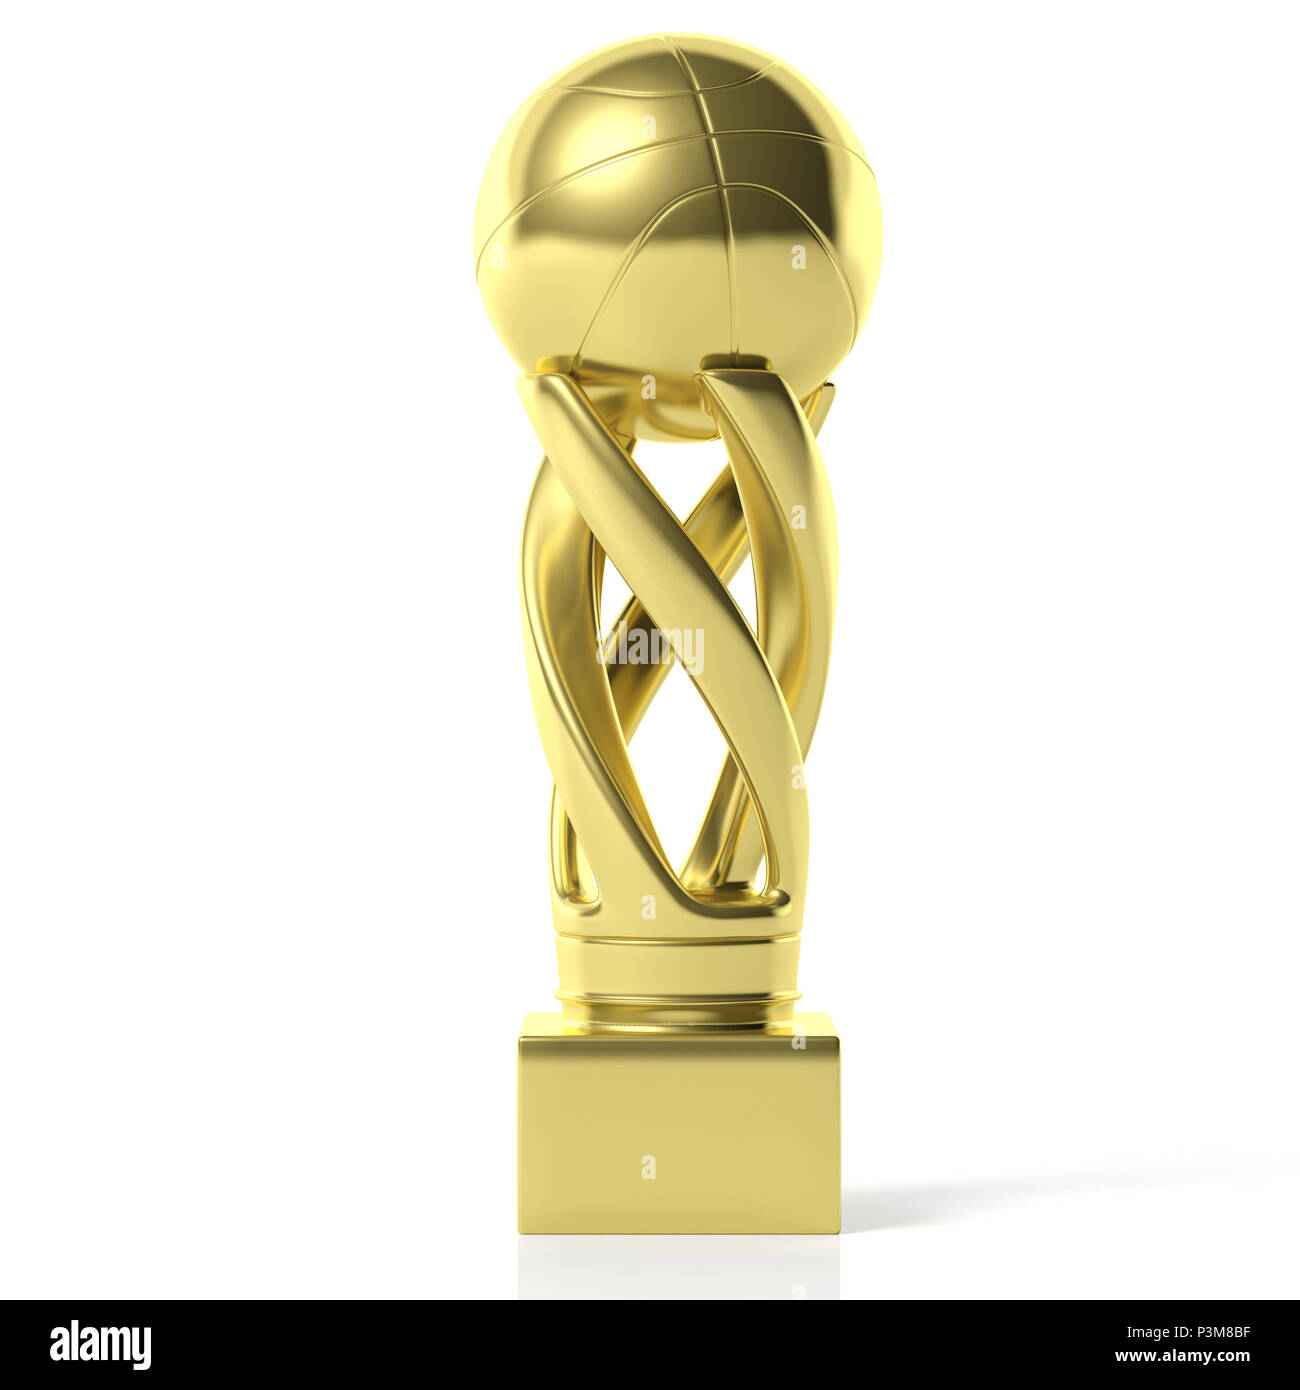 7,337 Championship Basketball Trophy Images, Stock Photos, 3D